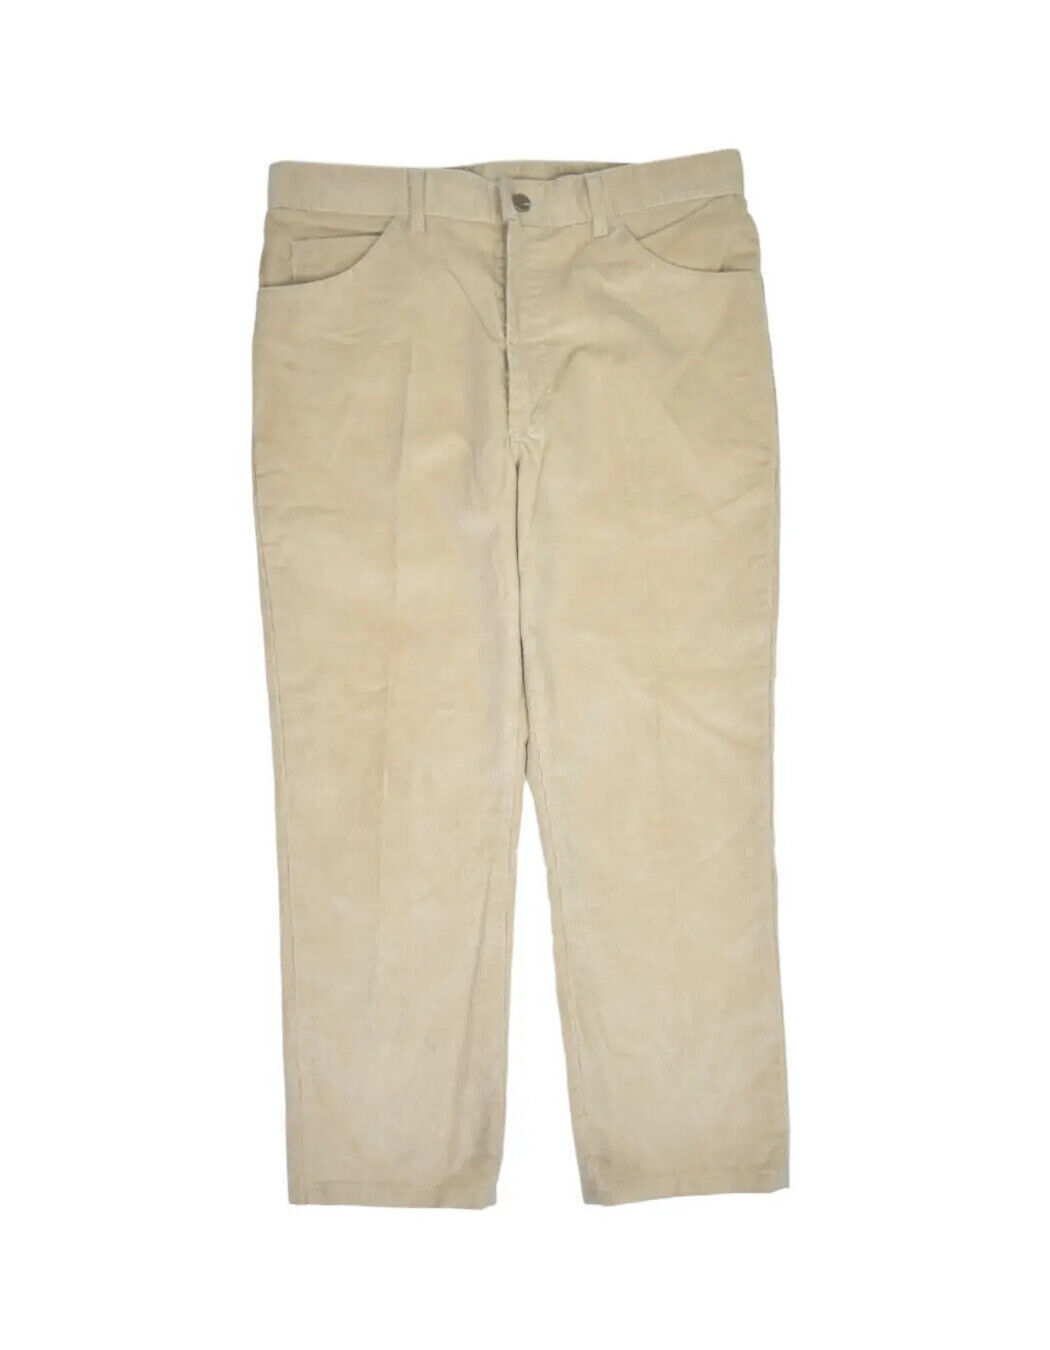 Primary image for Vintage Lee Courduroy Pants Mens 34x27 Khaki Beige Made in USA Cotton Blend